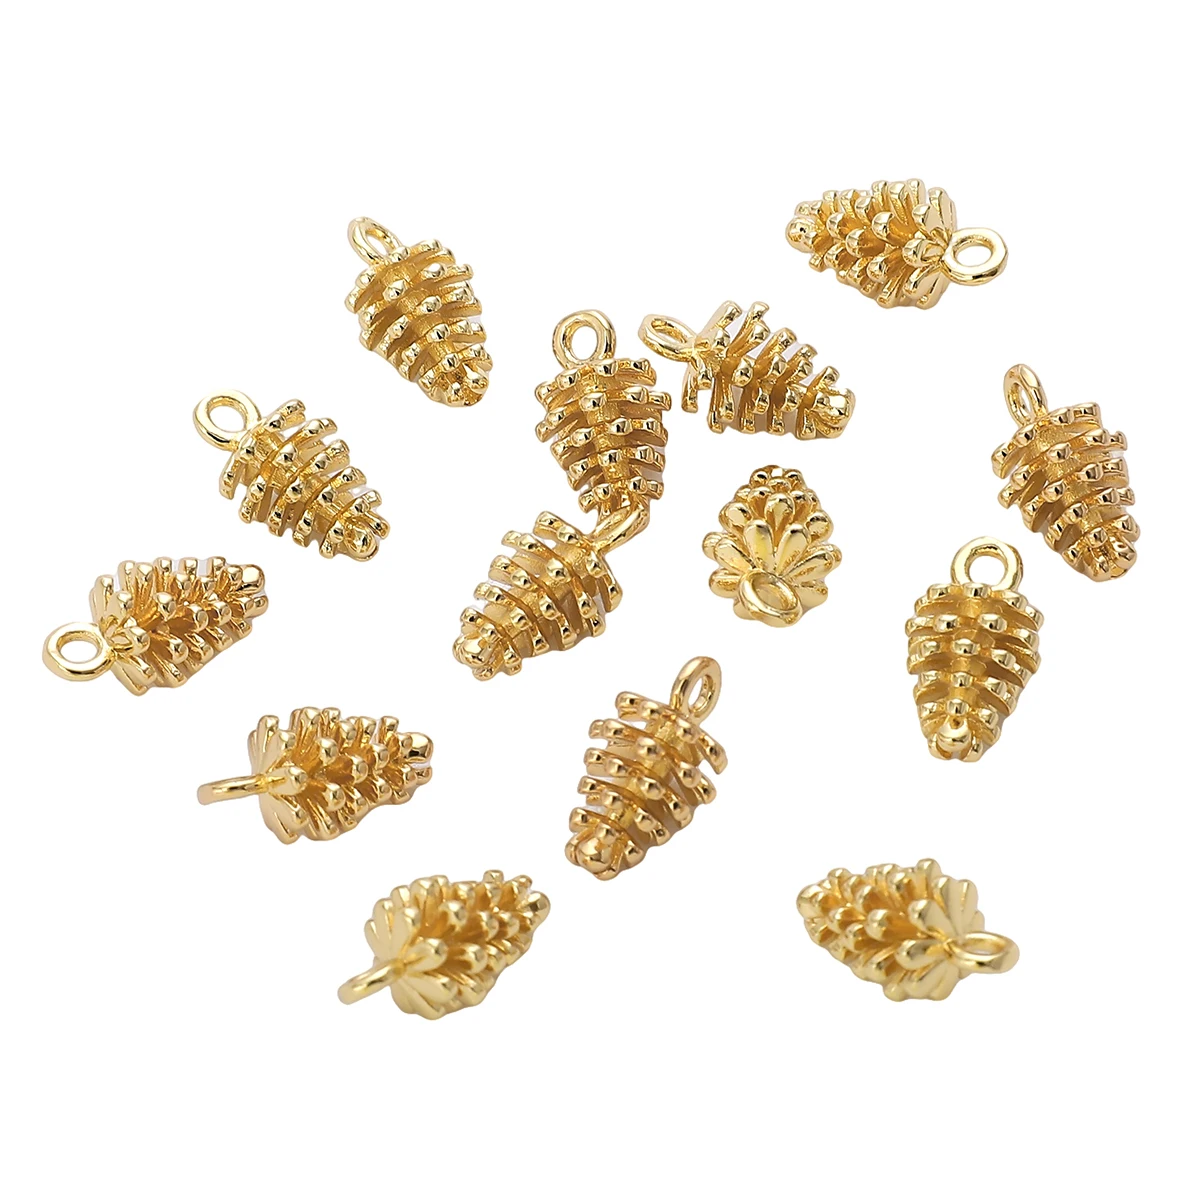 

7*13mm Electroplated 14K Gold Coated Copper Small Pine Nut Pendant Charm Jewelry Production Supplies DIY Bracelet Necklace